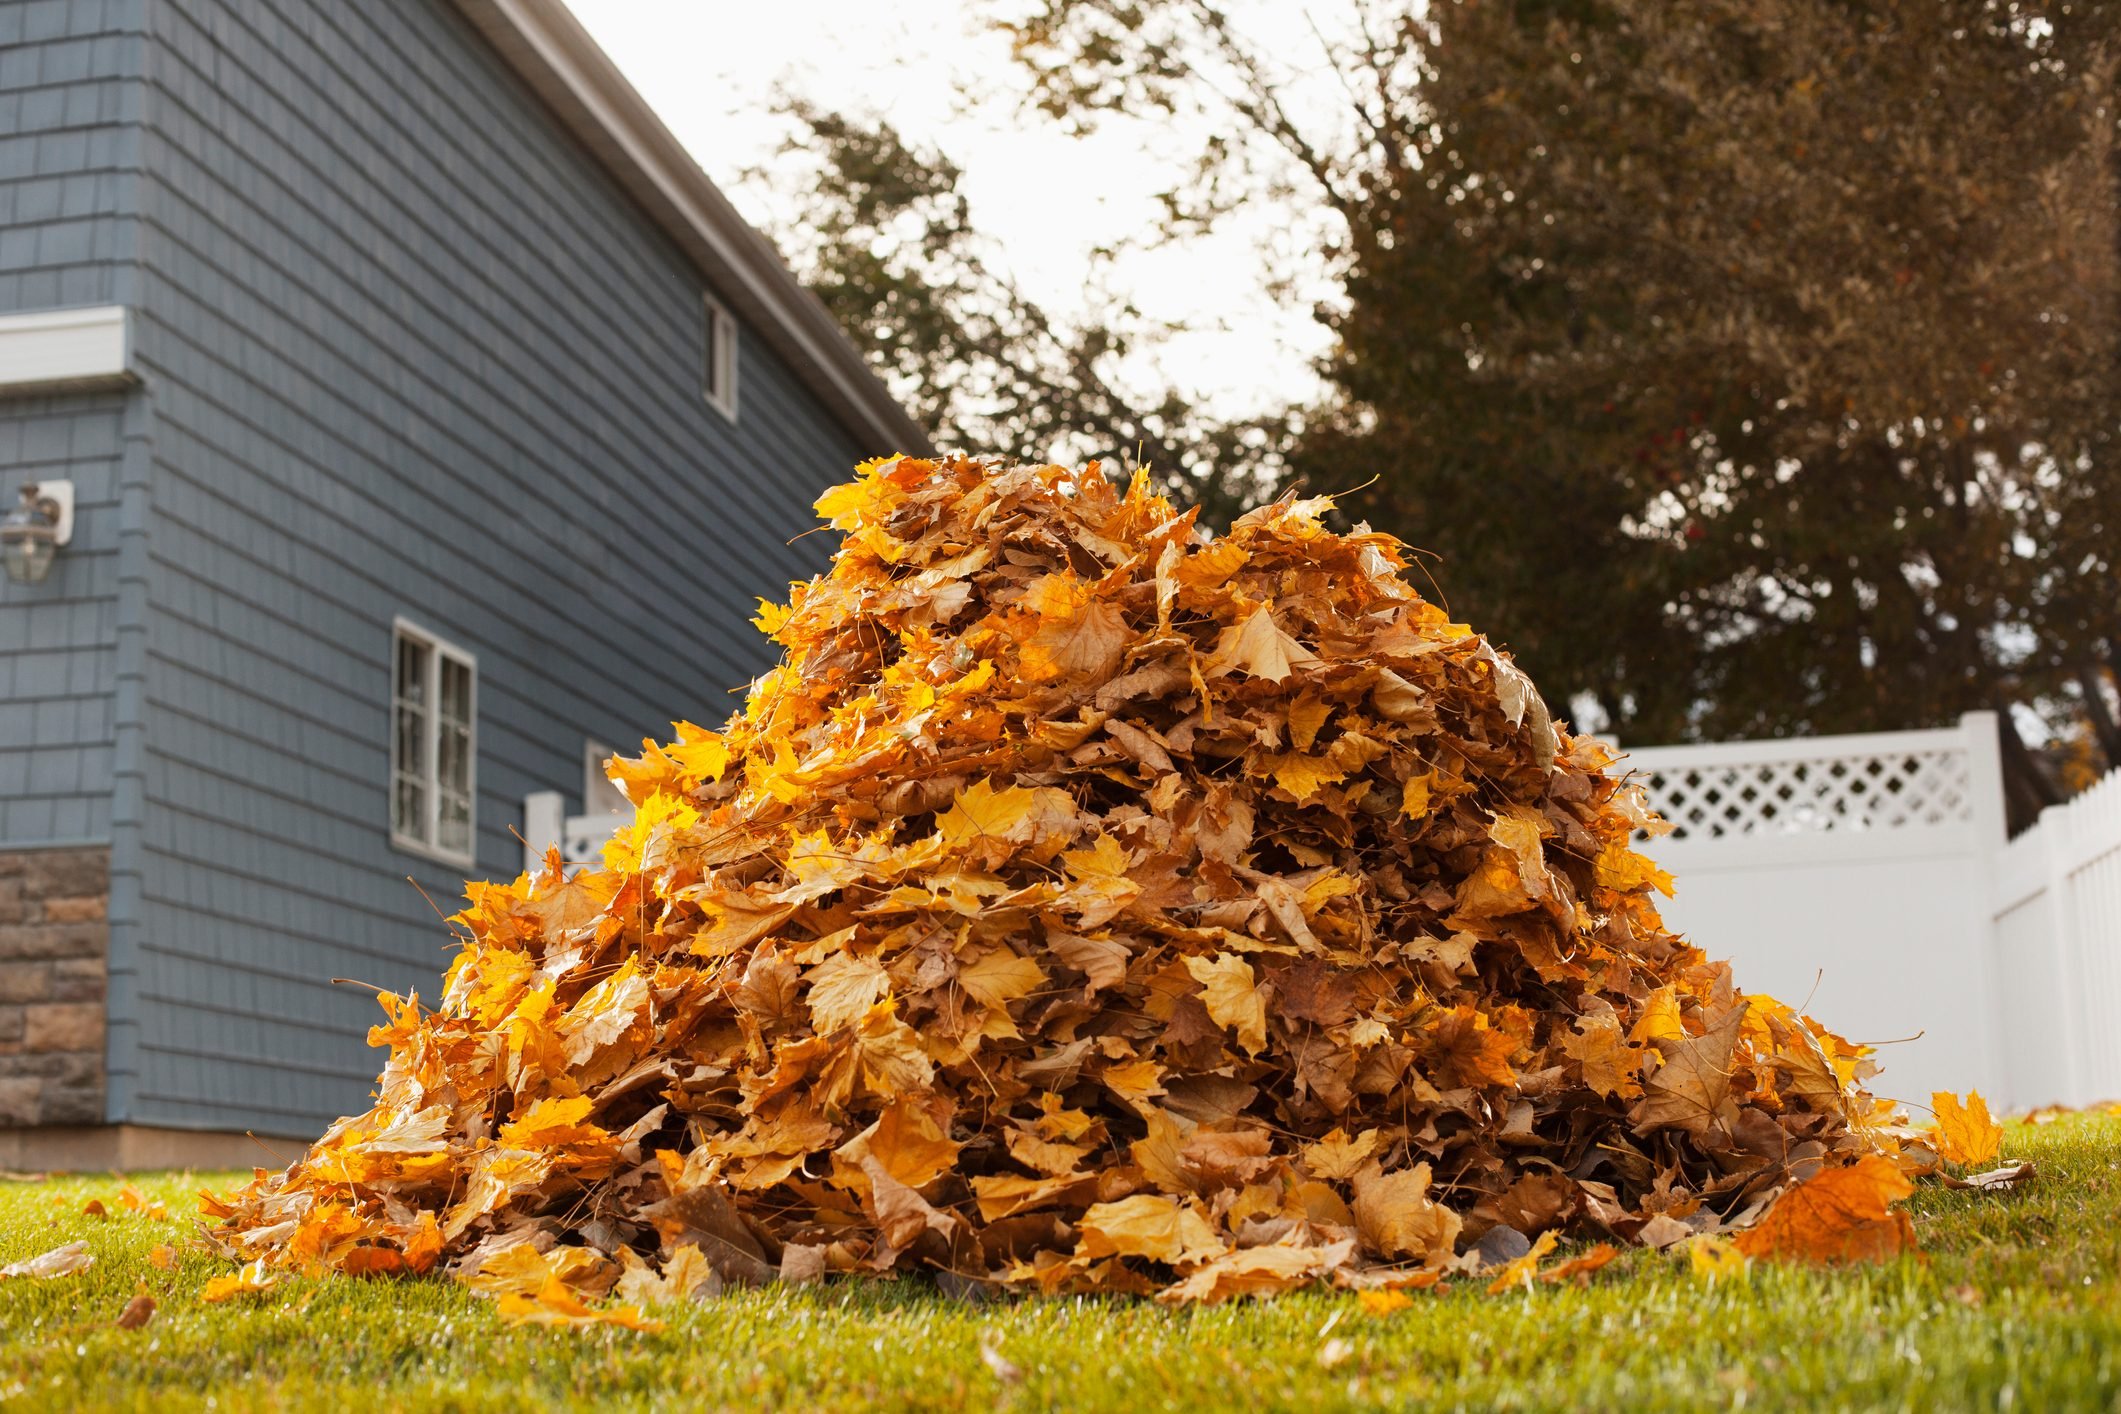 7 Ways To Reuse and Repurpose Dry Leaves | The Family Handyman